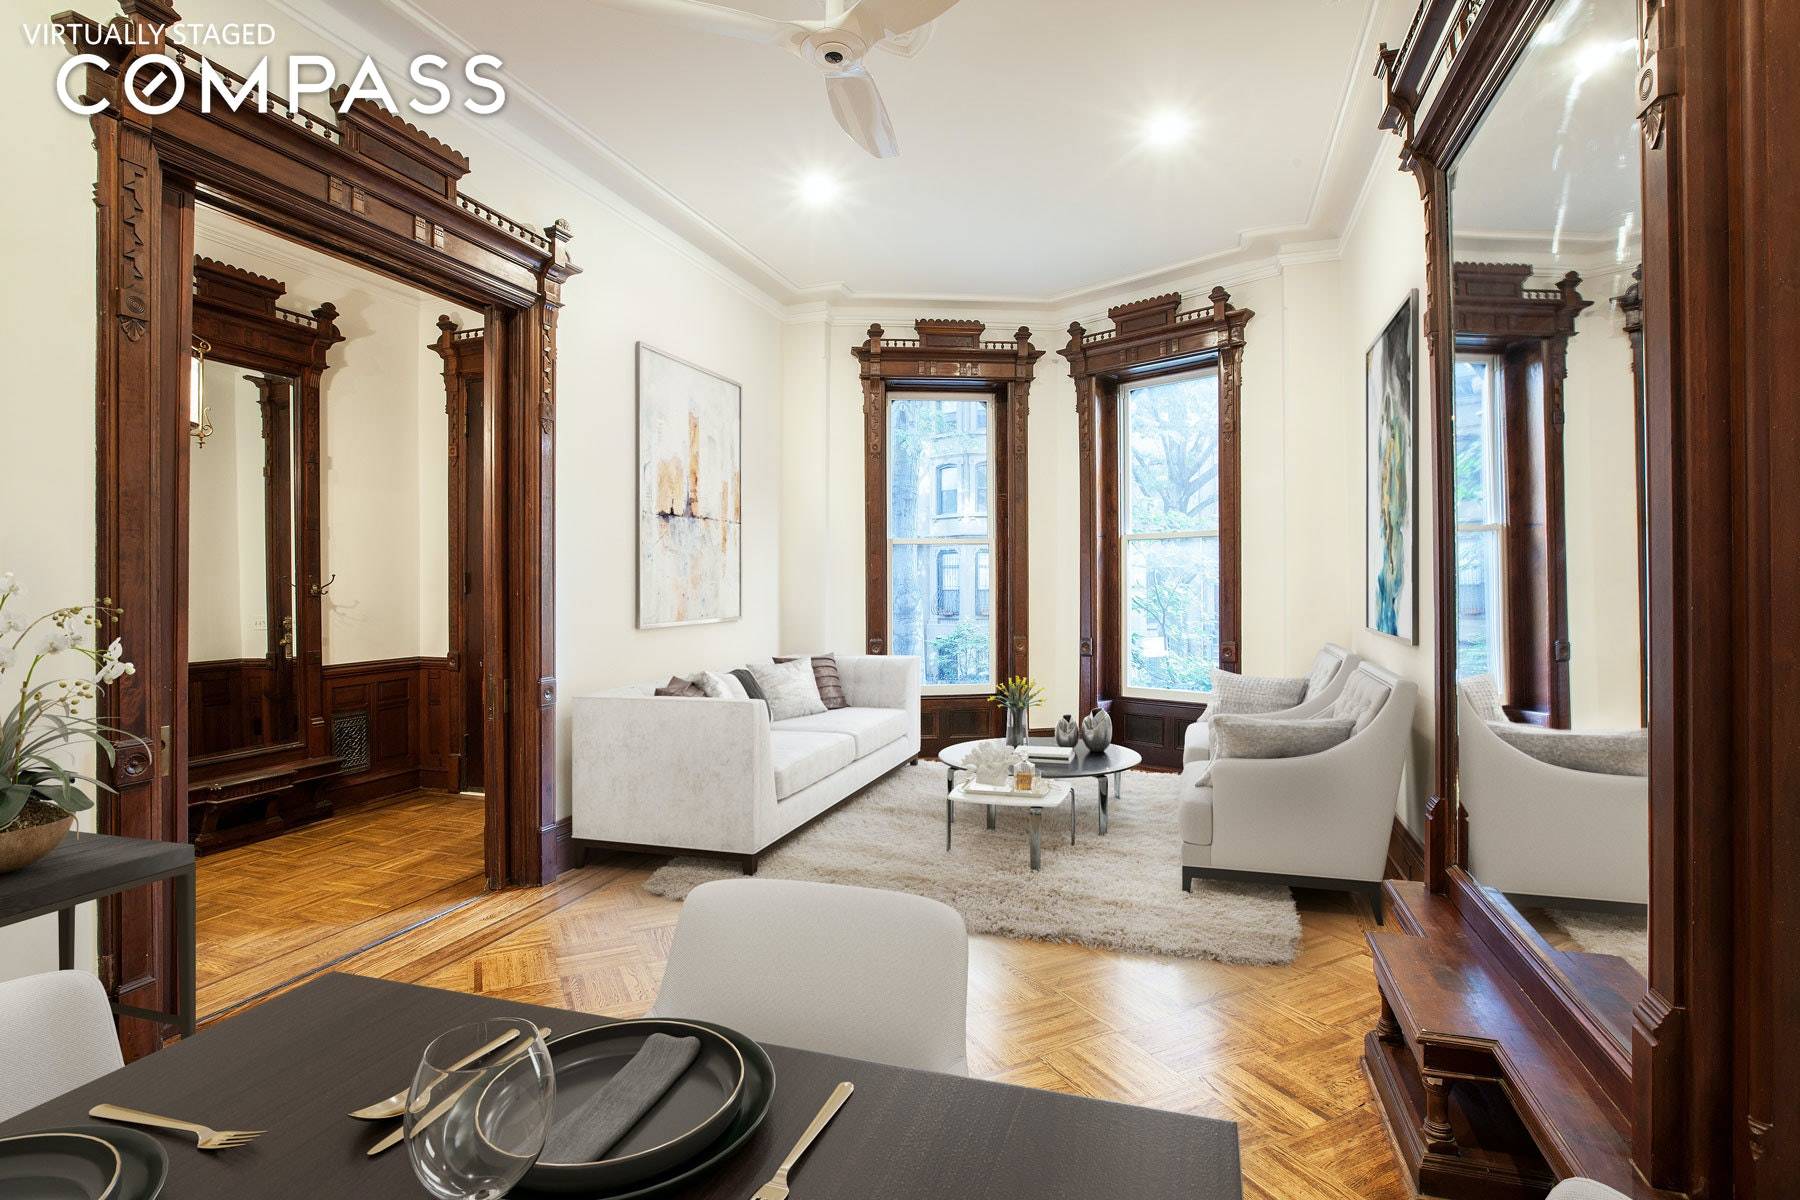 Welcome to this beautifully renovated 2 family brownstone, currently set up as a triplex with 5 beds home office den, 3.